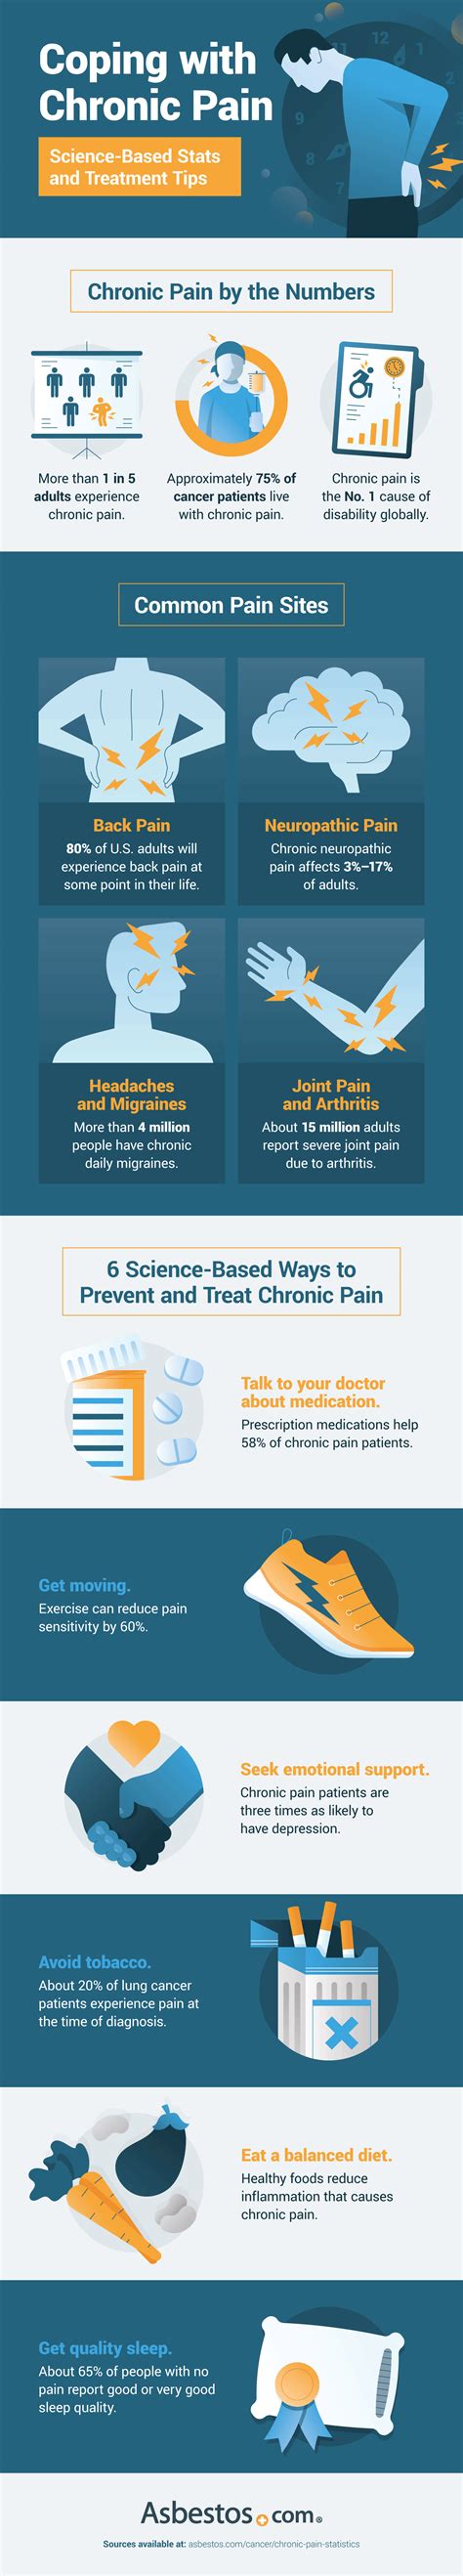 Coping With Chronic Pain Treatment Tips Infographic